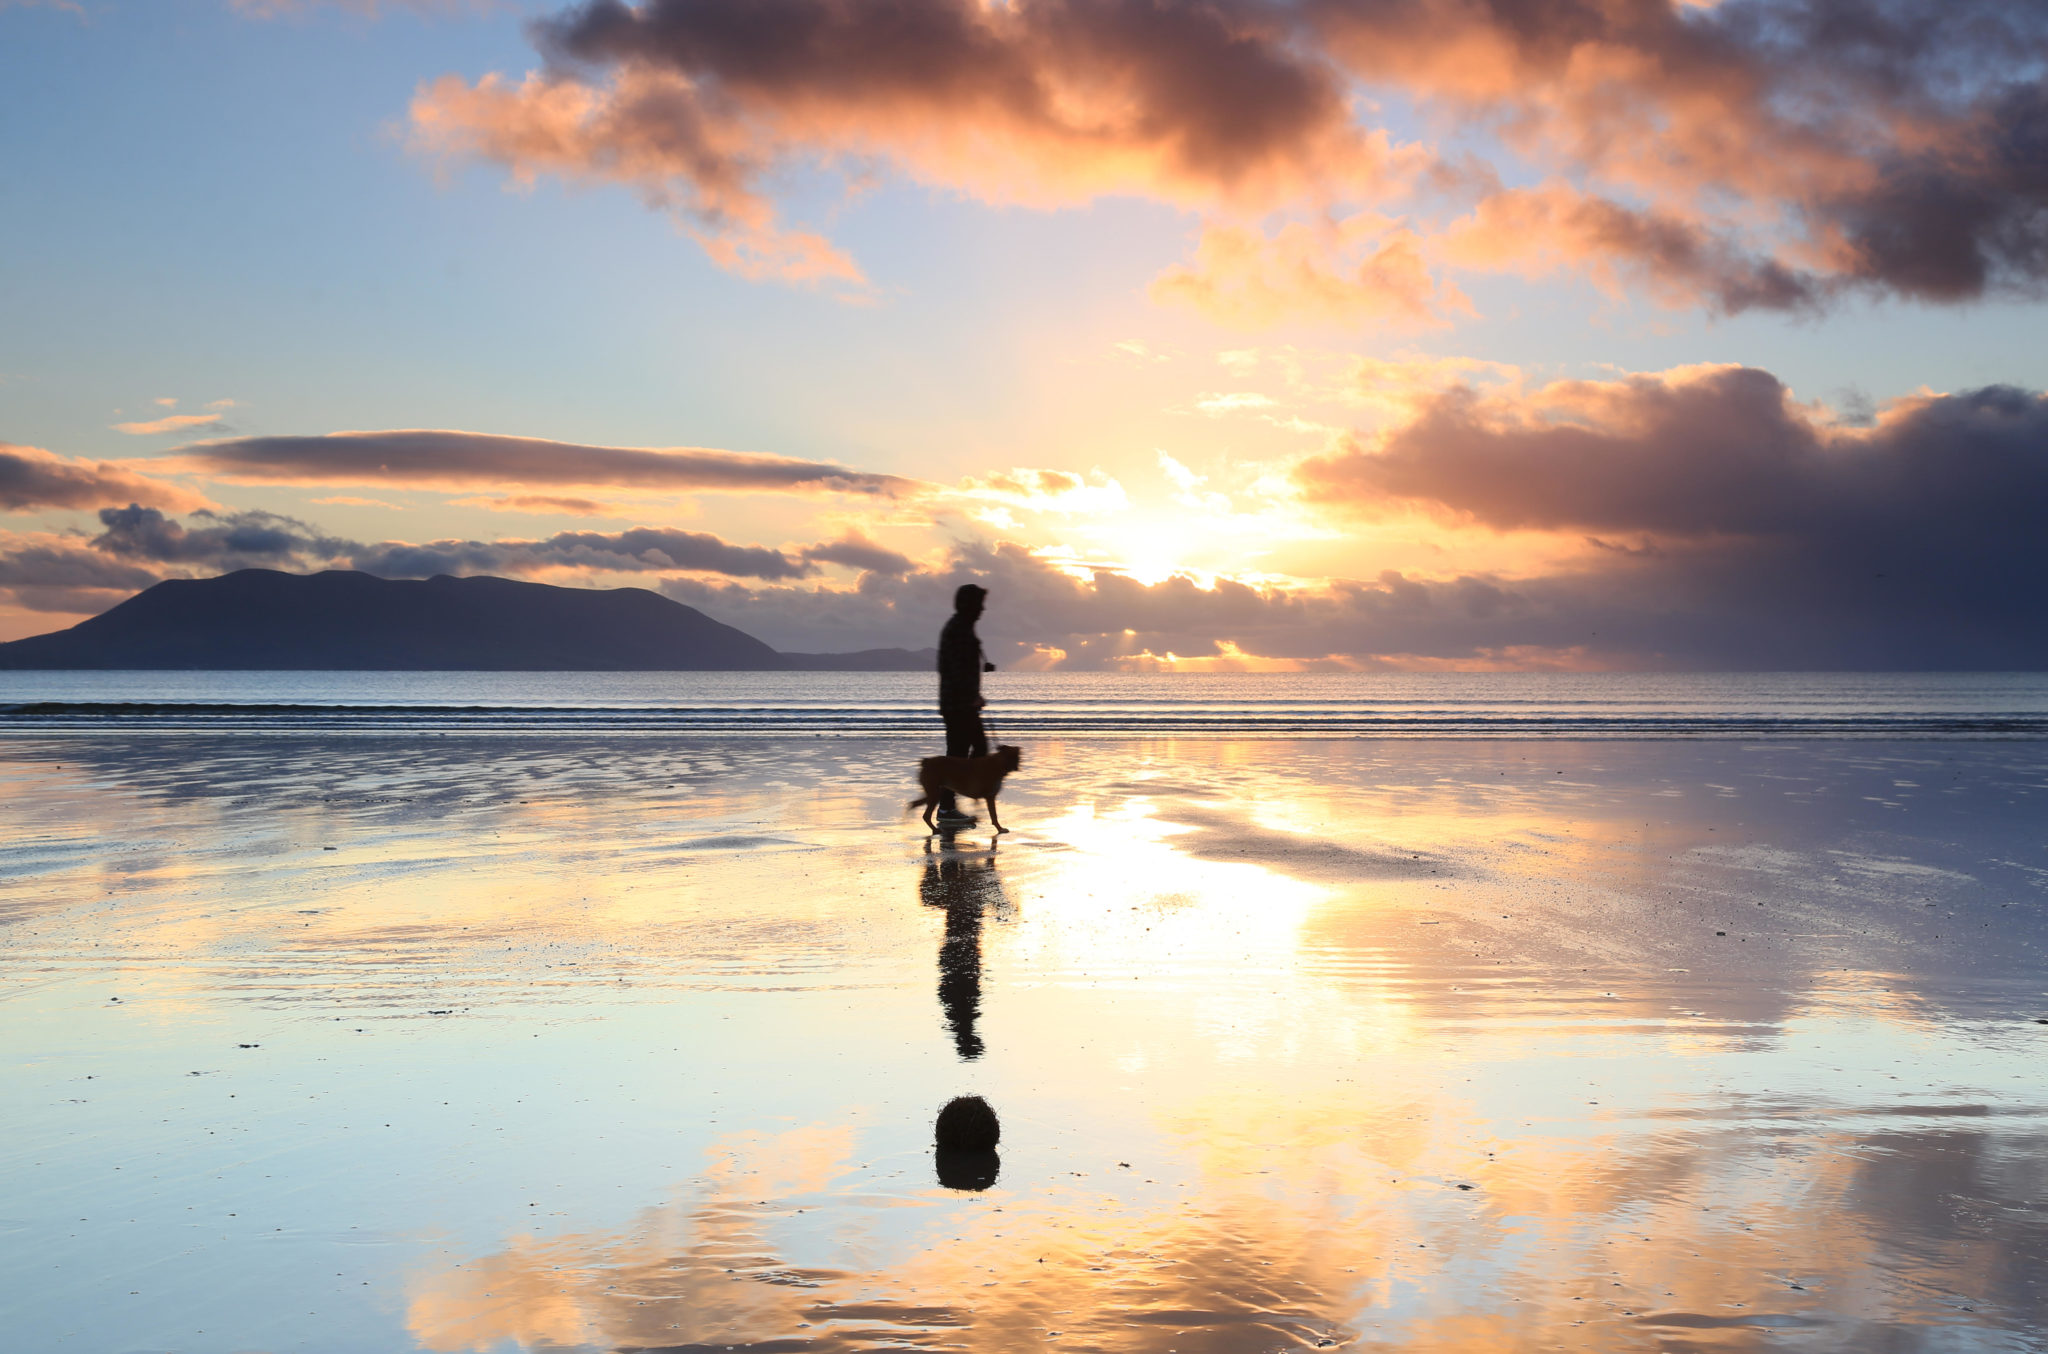 Scenic water view in Ireland with man and dog.  Image: Image: Michael Diggin / Alamy Stock Photo